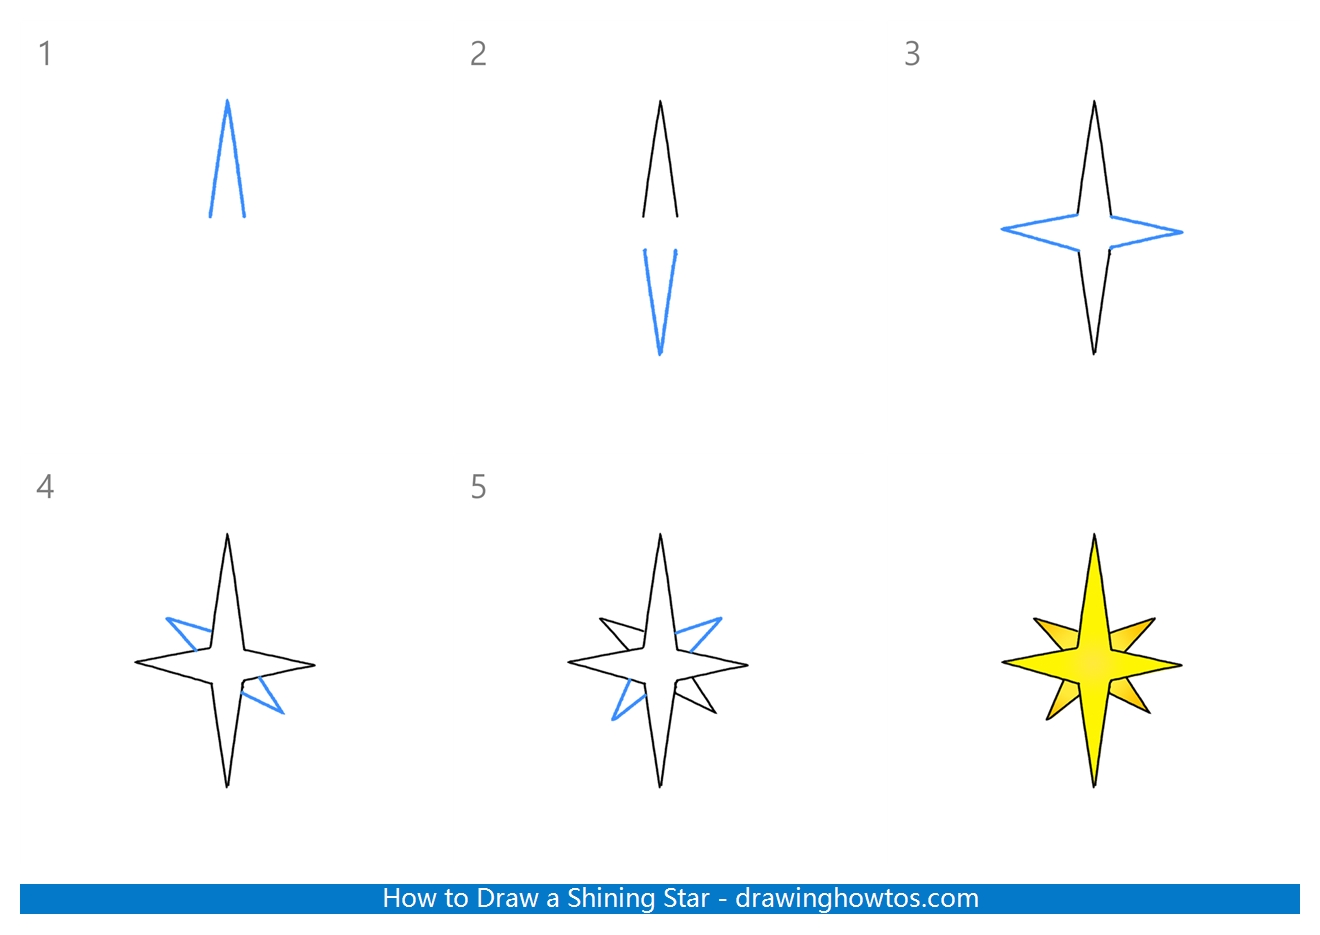 How to Draw a Shinning Star Step by Step